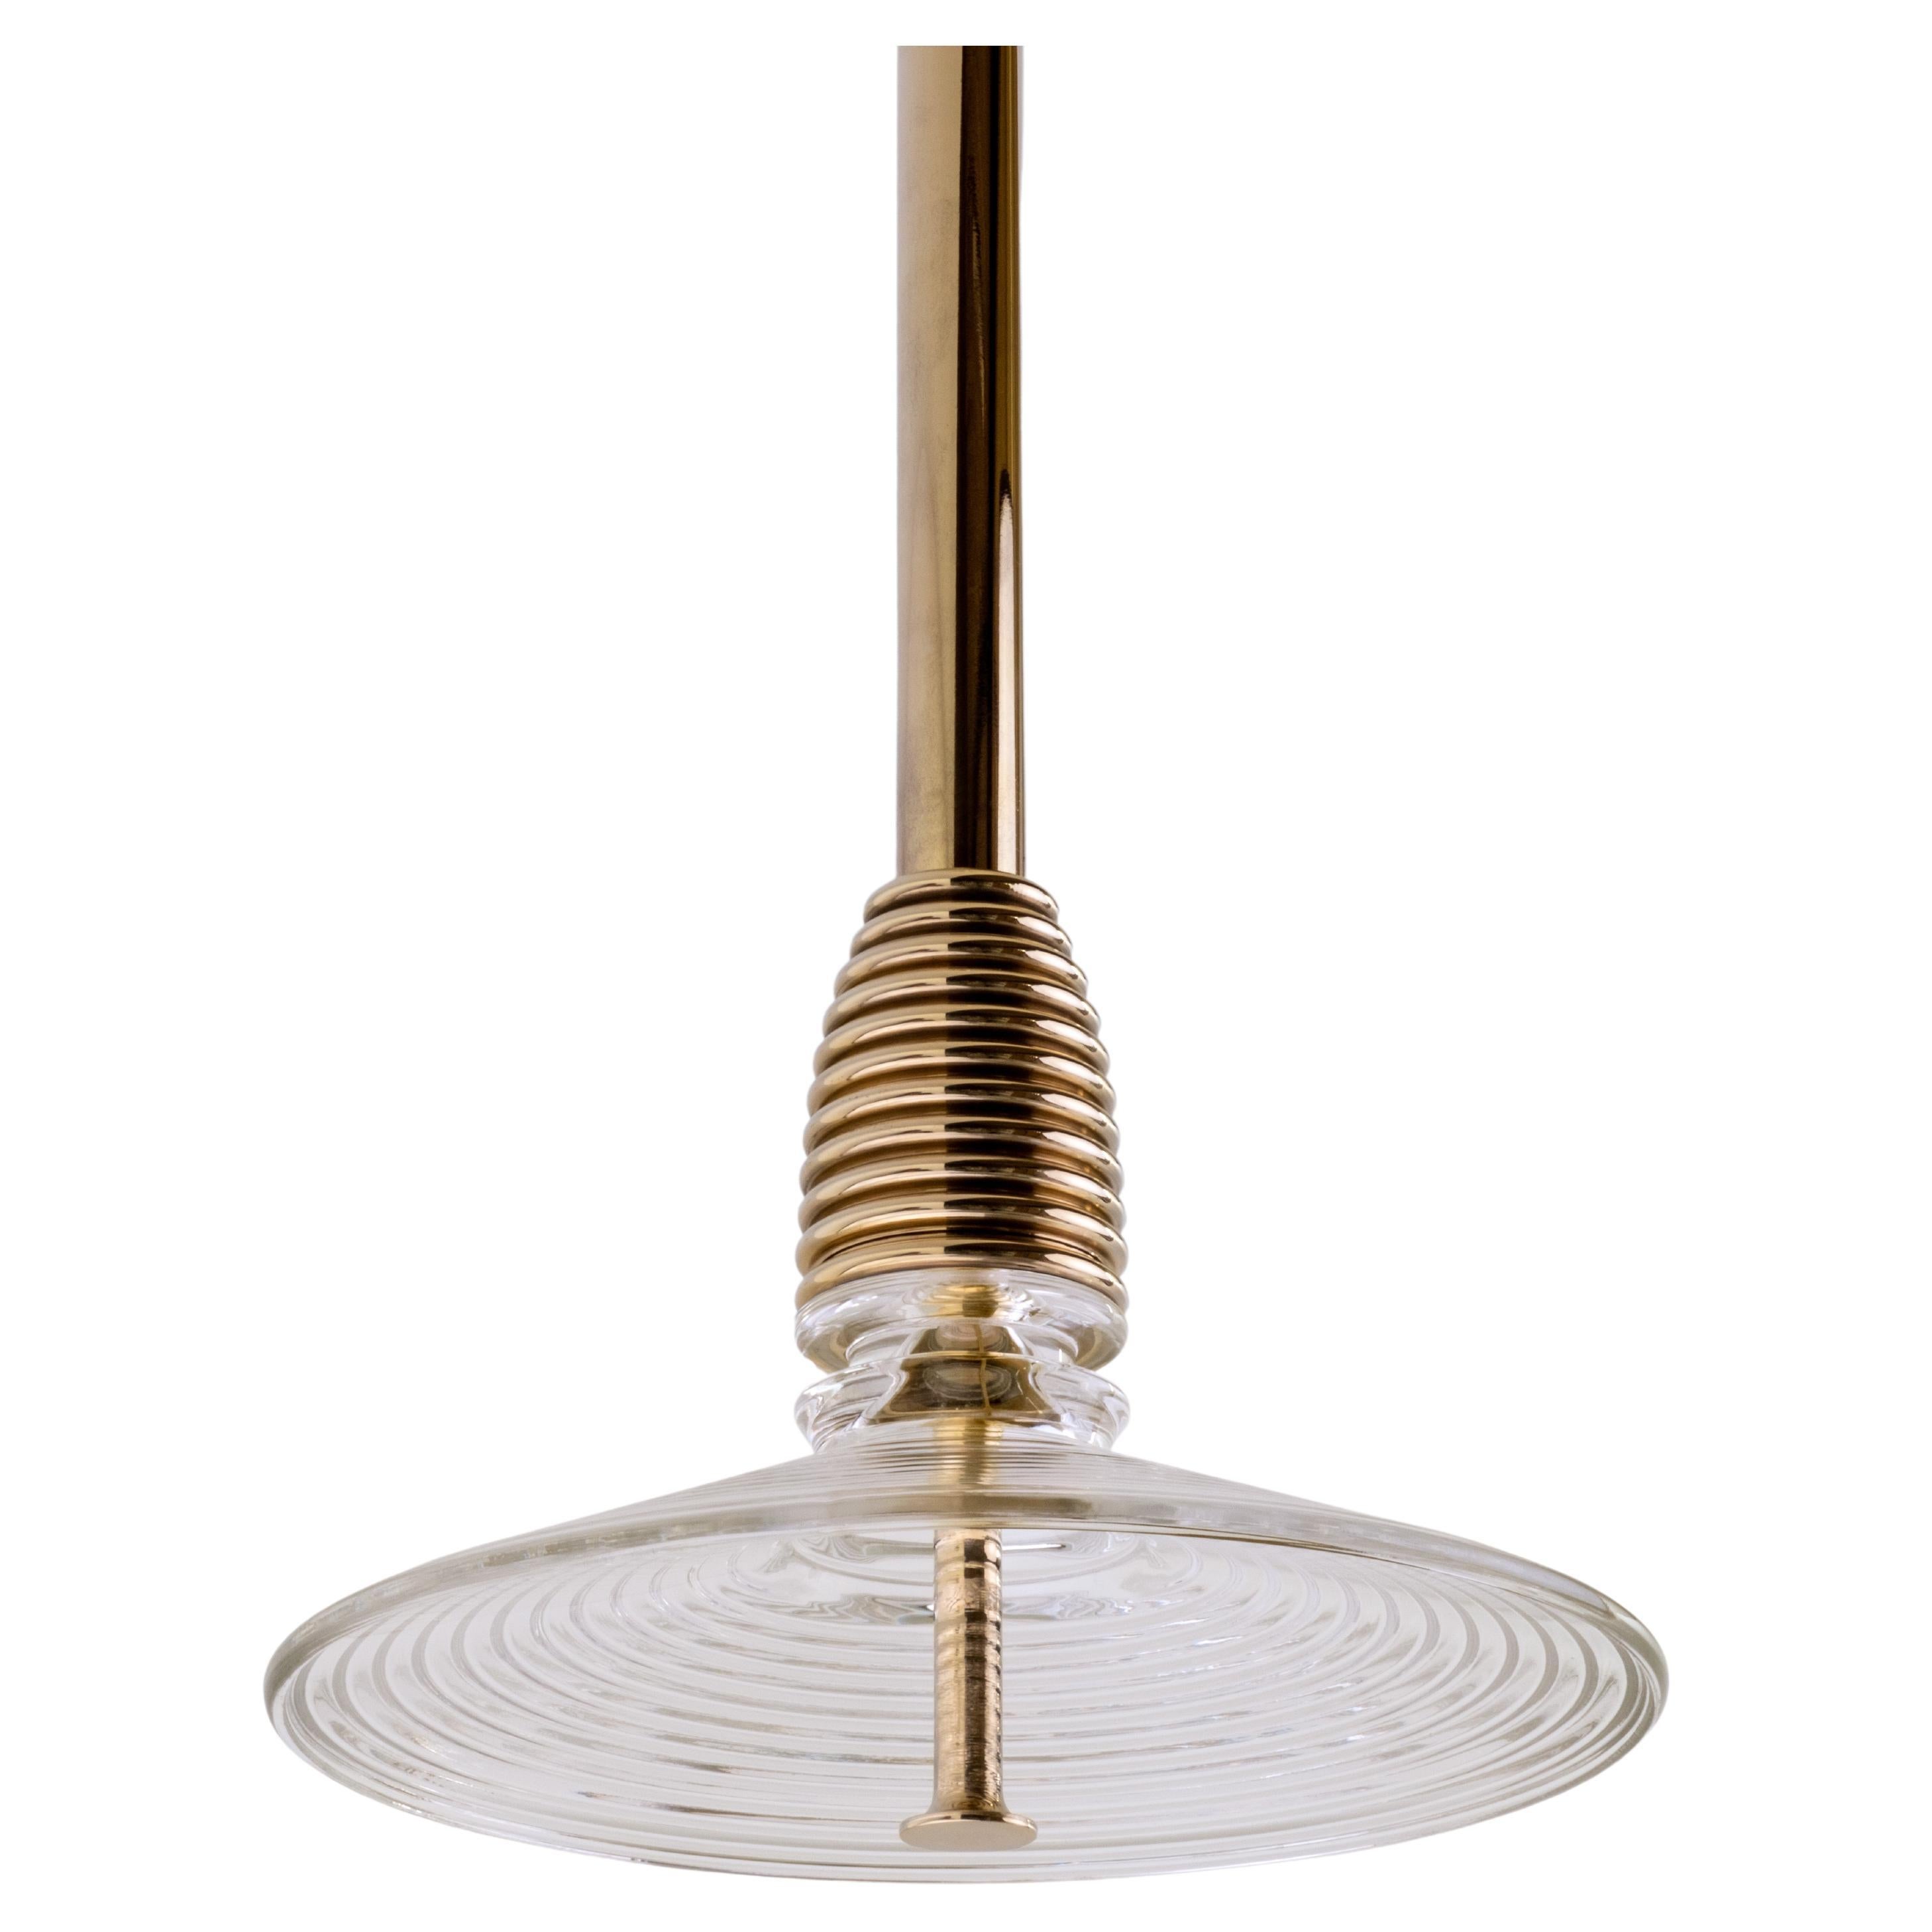 The Insulator 'B' Pendant in polished brass and clear glass by NOVOCASTRIAN deco